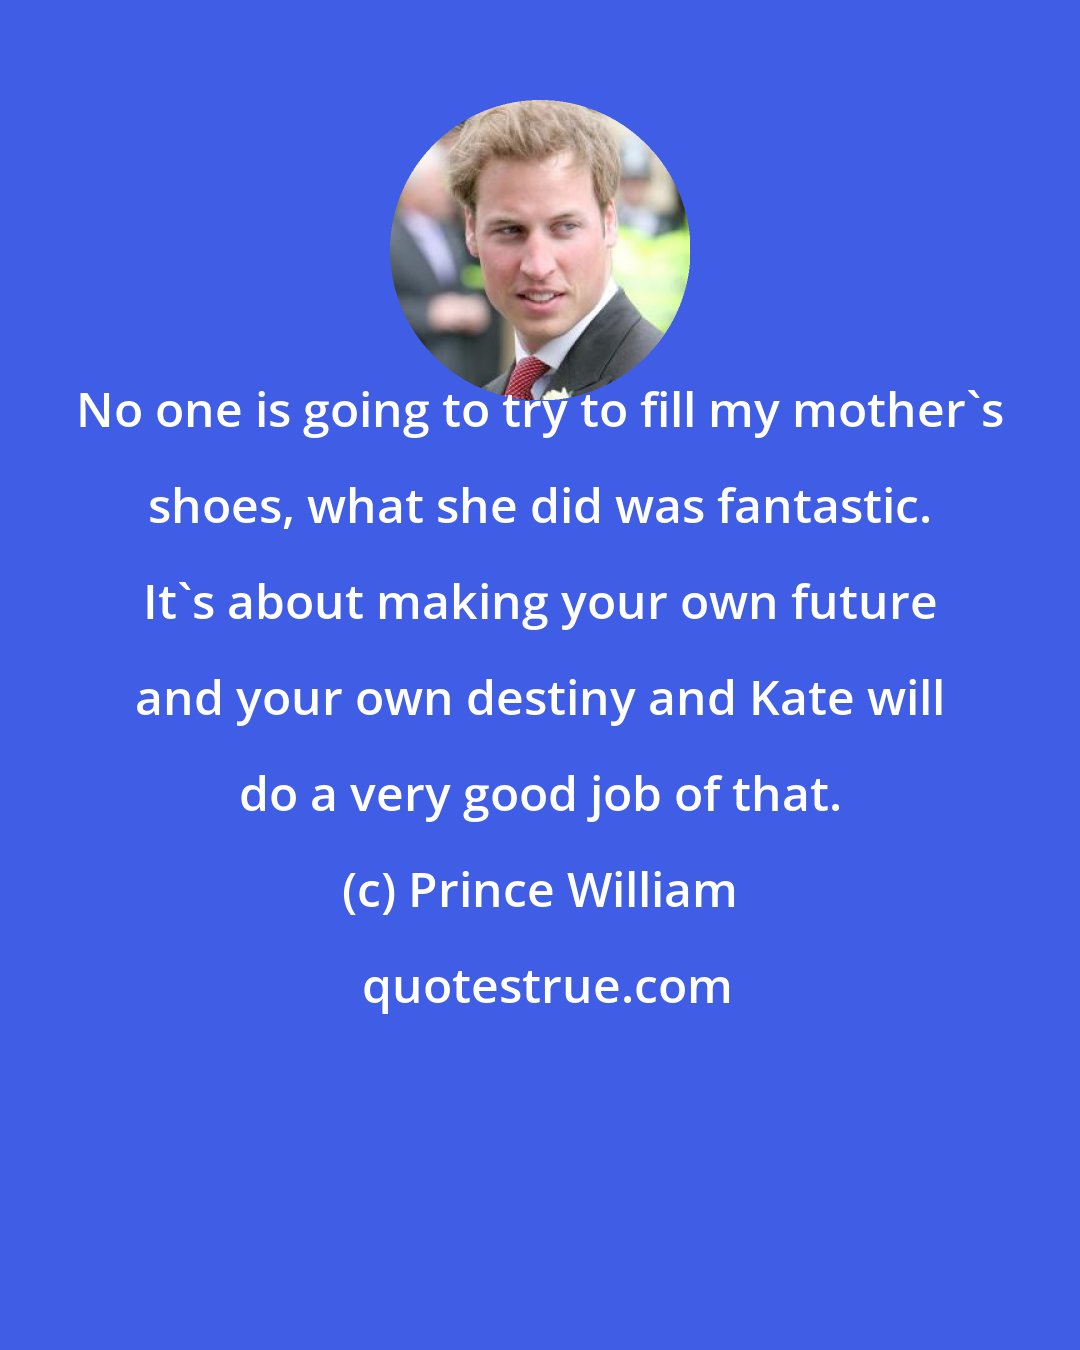 Prince William: No one is going to try to fill my mother's shoes, what she did was fantastic. It's about making your own future and your own destiny and Kate will do a very good job of that.